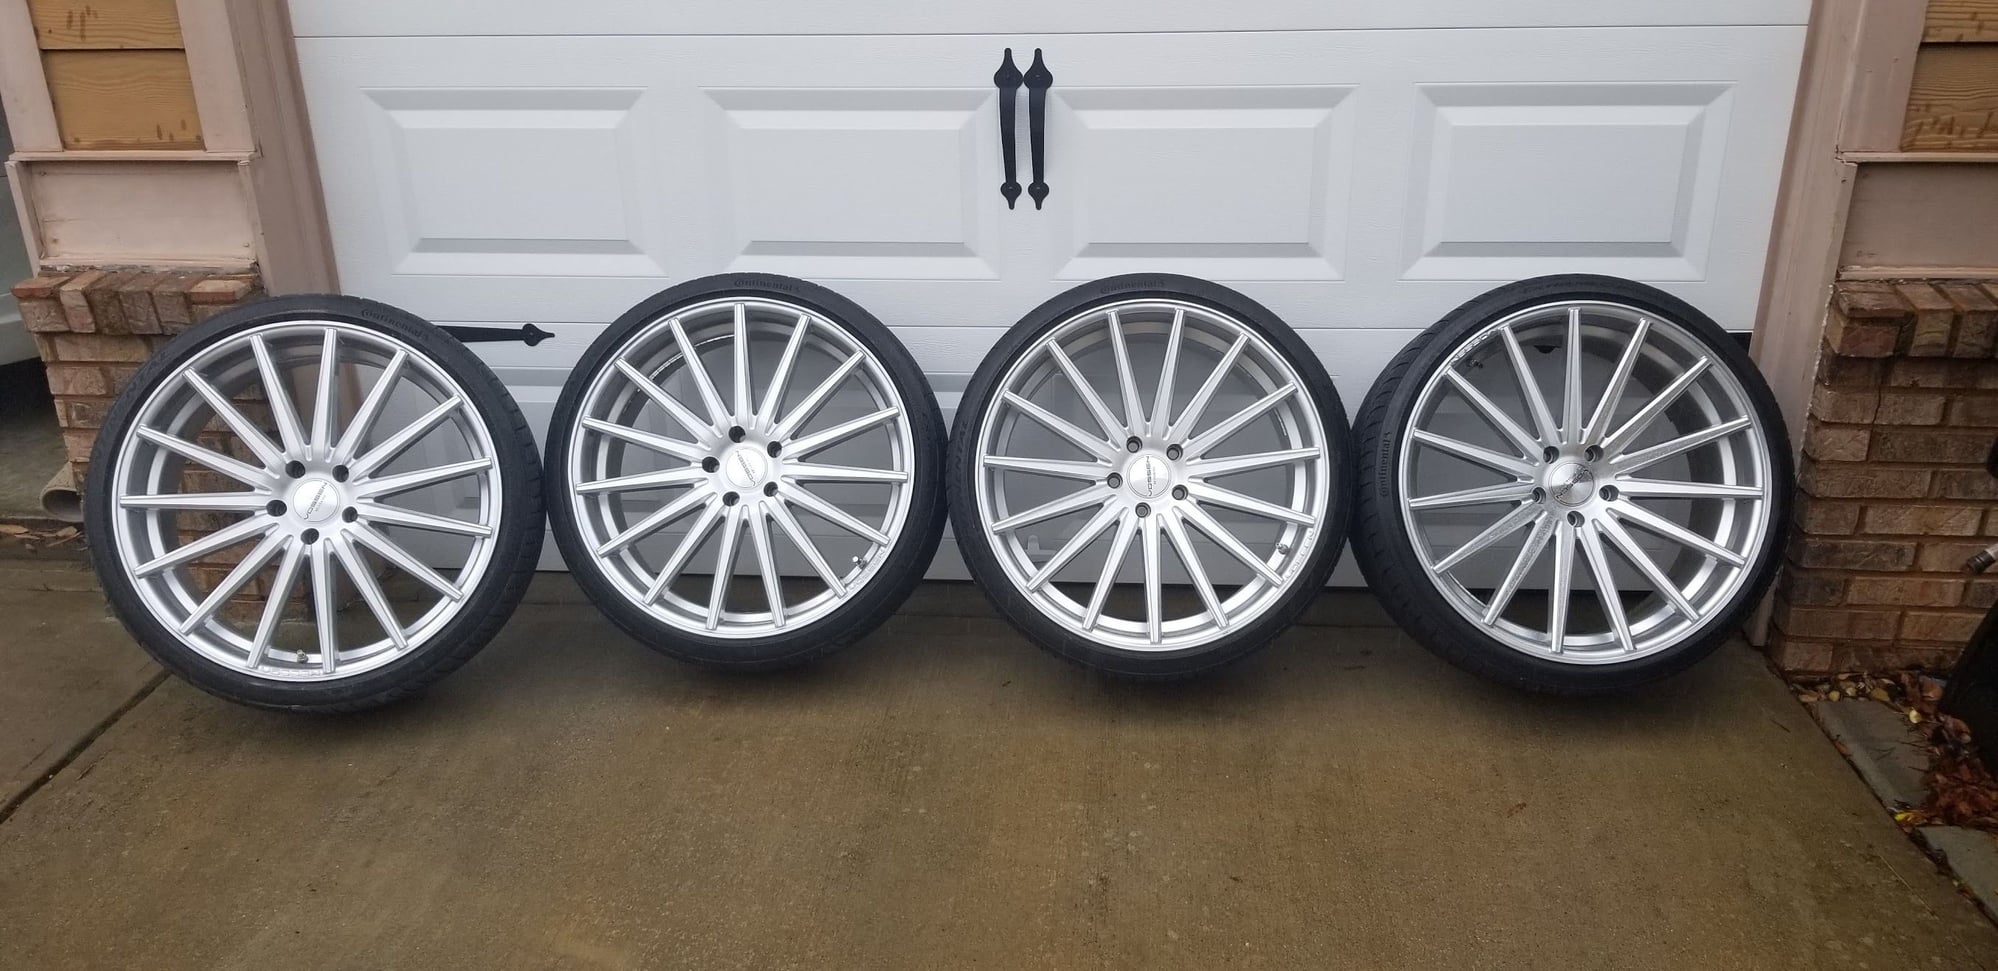 Wheels and Tires/Axles - FOR SALE: Set of 4 22 inch Vossen VFS2 Staggered wheels and tires - Used - Atlanta, GA 30317, United States